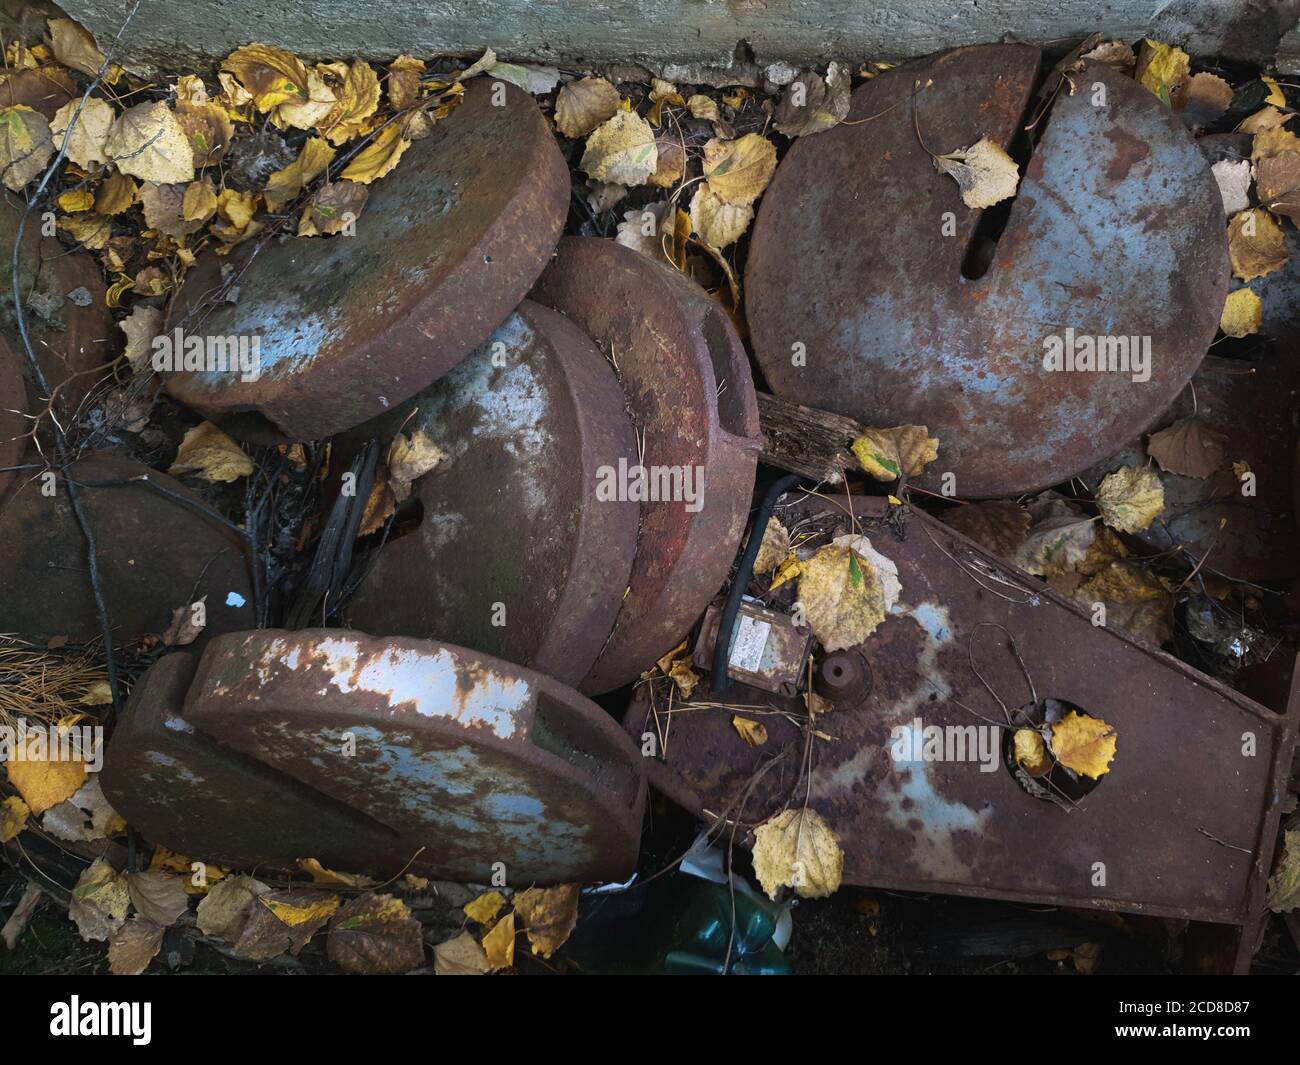 Rusty metal parts from radioactive vehicles in the city of Pripyat, Chernobyl exclusion zone, Ukraine Stock Photo